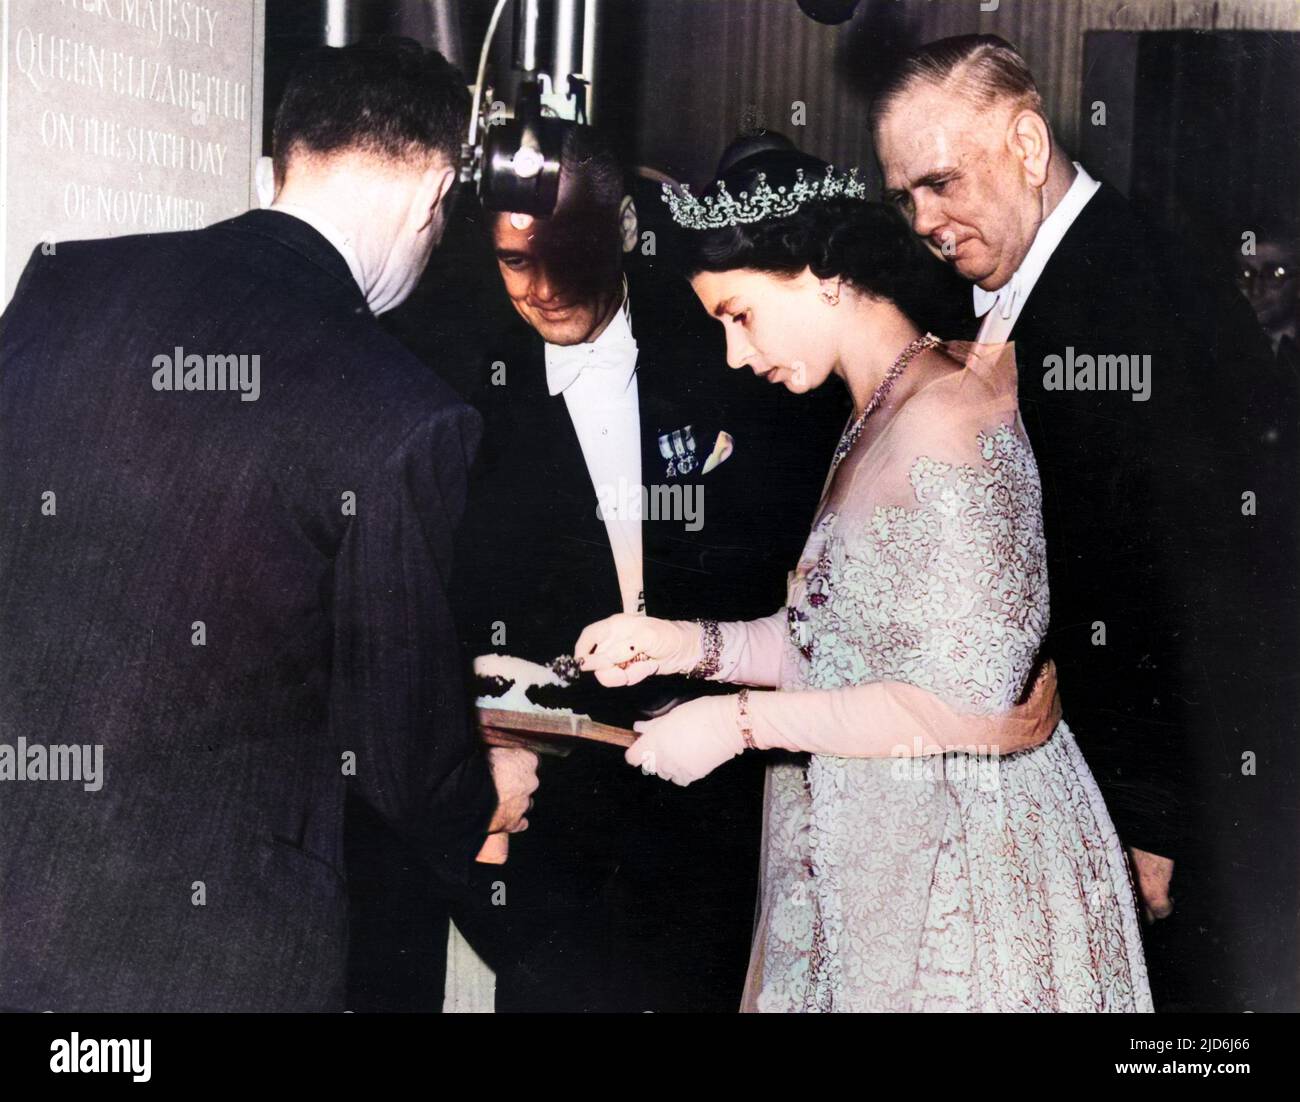 Queen Elizabeth II visits Lloyd's to lay the foundations tone of their new building in Lime Street. This picture shows her Majesty taking a trowel full of mortar ready to lay the stone. Colourised version of: 10510769       Date: 6th November 1952. Stock Photo